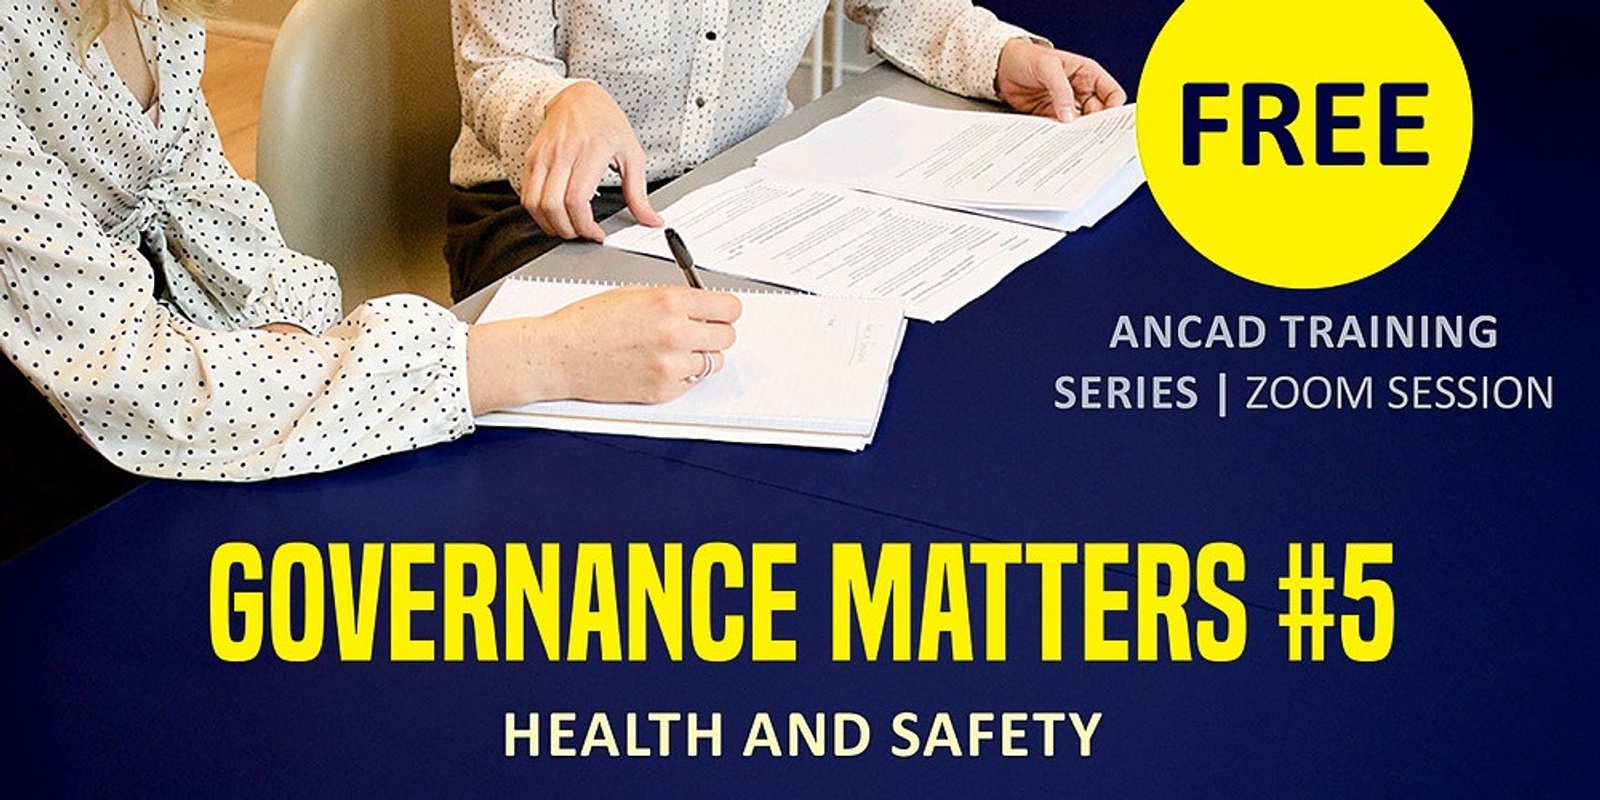 GOVERNANCE MATTERS #5: Health & Safety